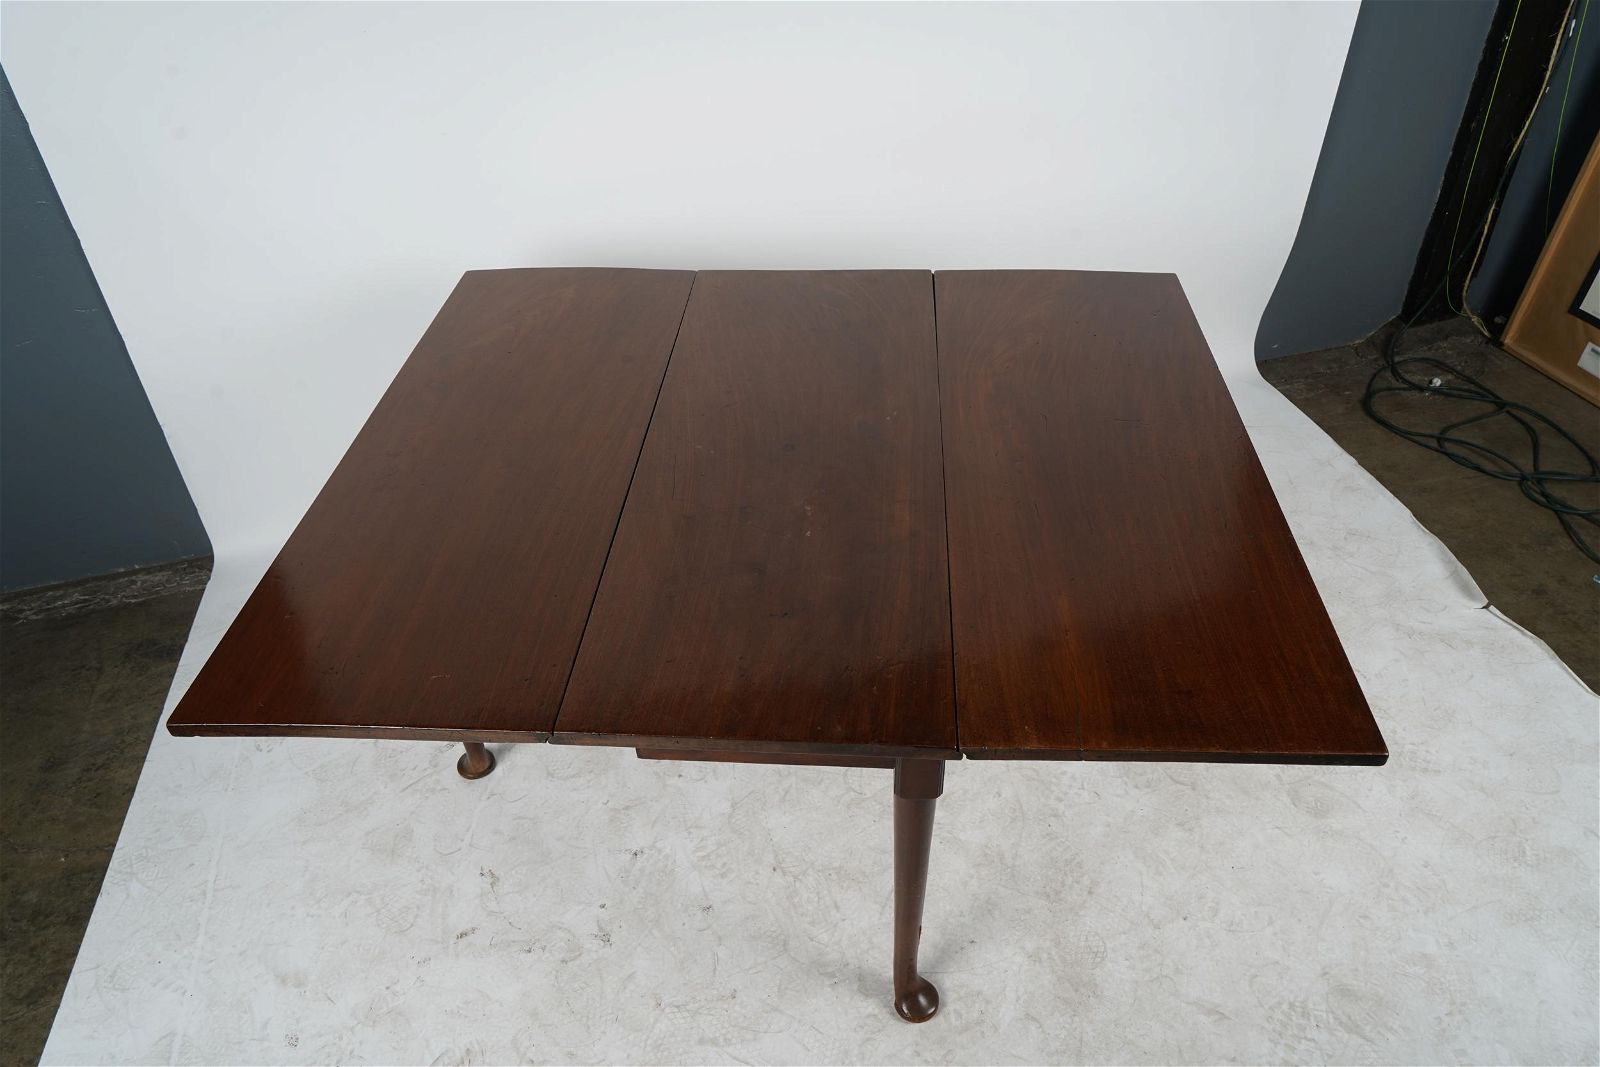 AF1-012: Antique Period English Queen Anne Mahogany Drop Leaf Table Late 18th Century